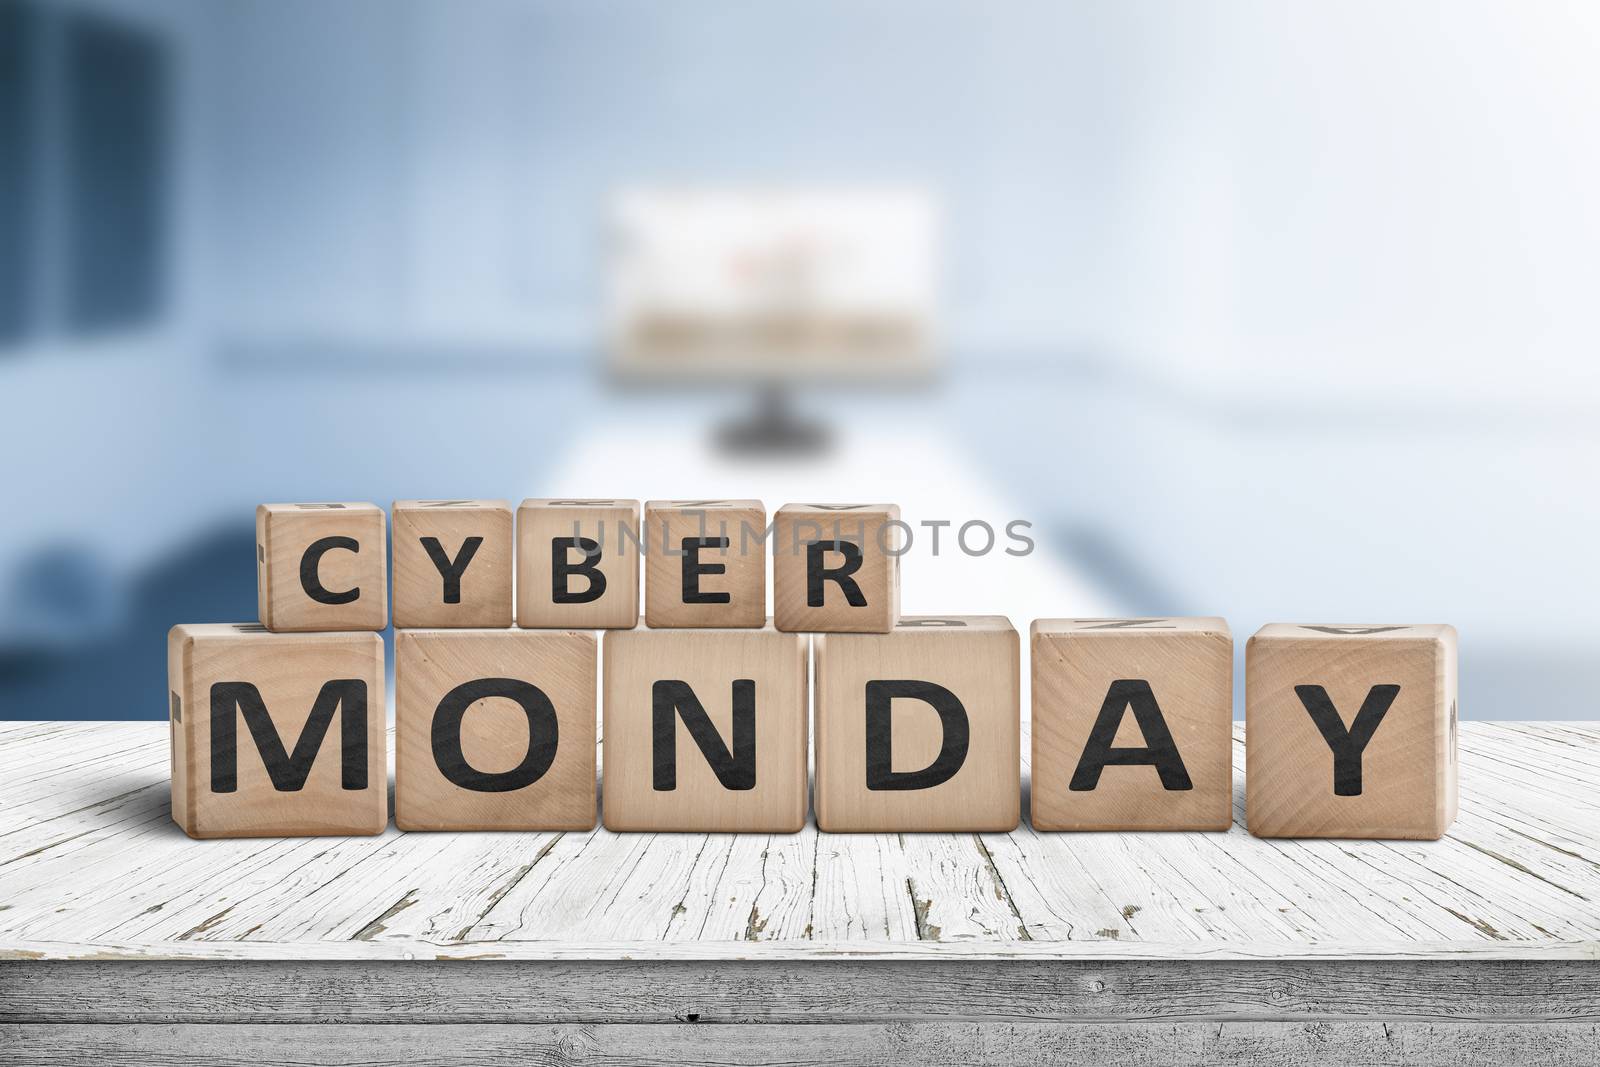 Cyber monday sign on a wooden desk with a monitor in a blue room in the background